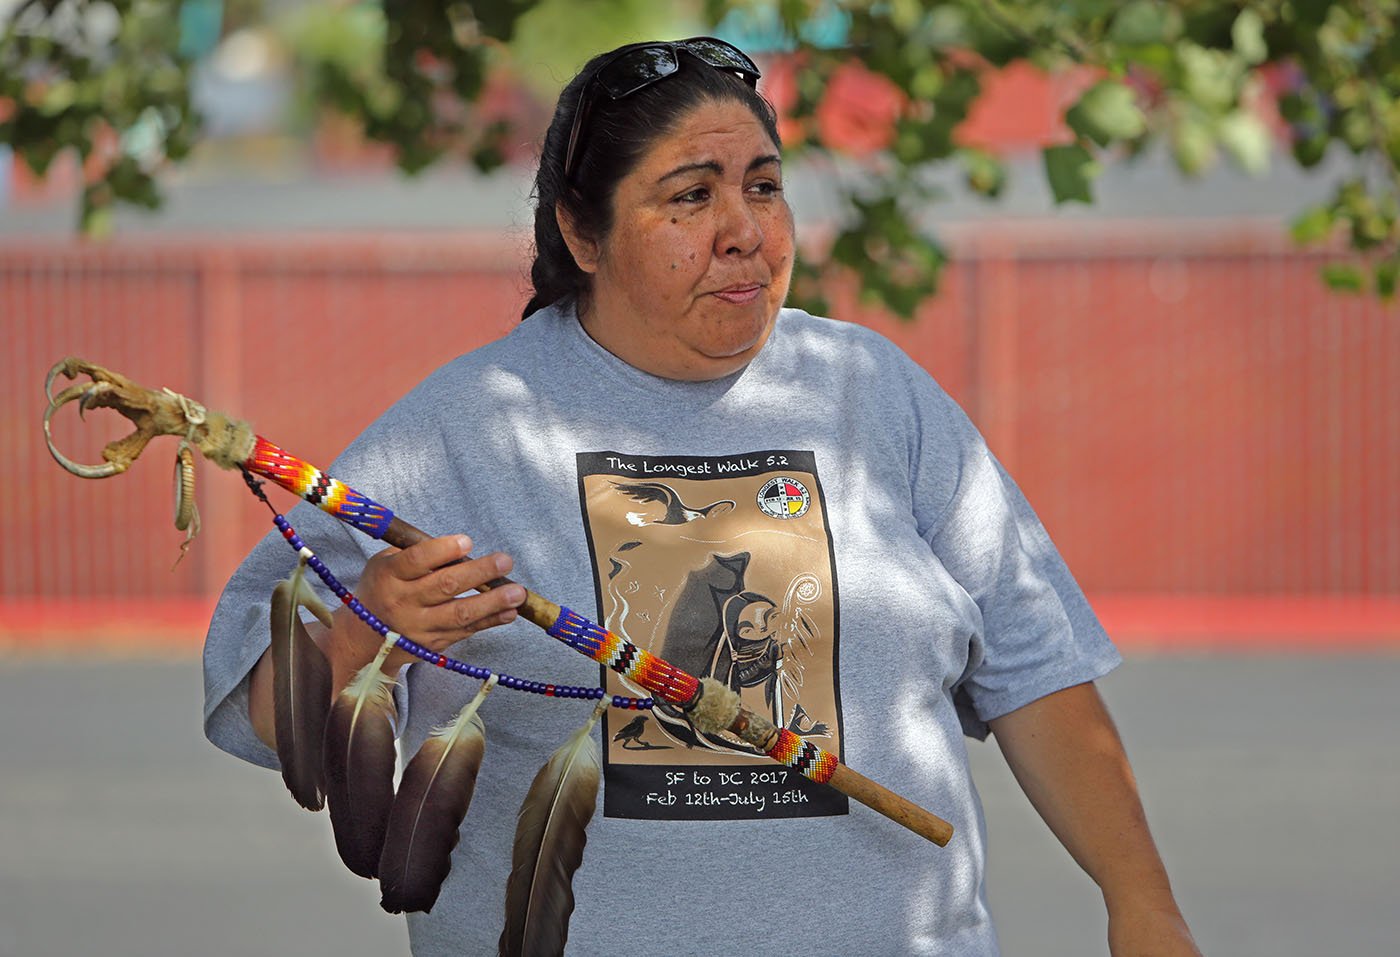  Concord, CA — Corrina Gould, spokesperson for the Lisjan Ohlone people, is a prominent indigenous leader in the Bay Area and a strong ally of the Winnemem Wintu. September 11, 2017. Tom Levy/The Spiritual Edge 